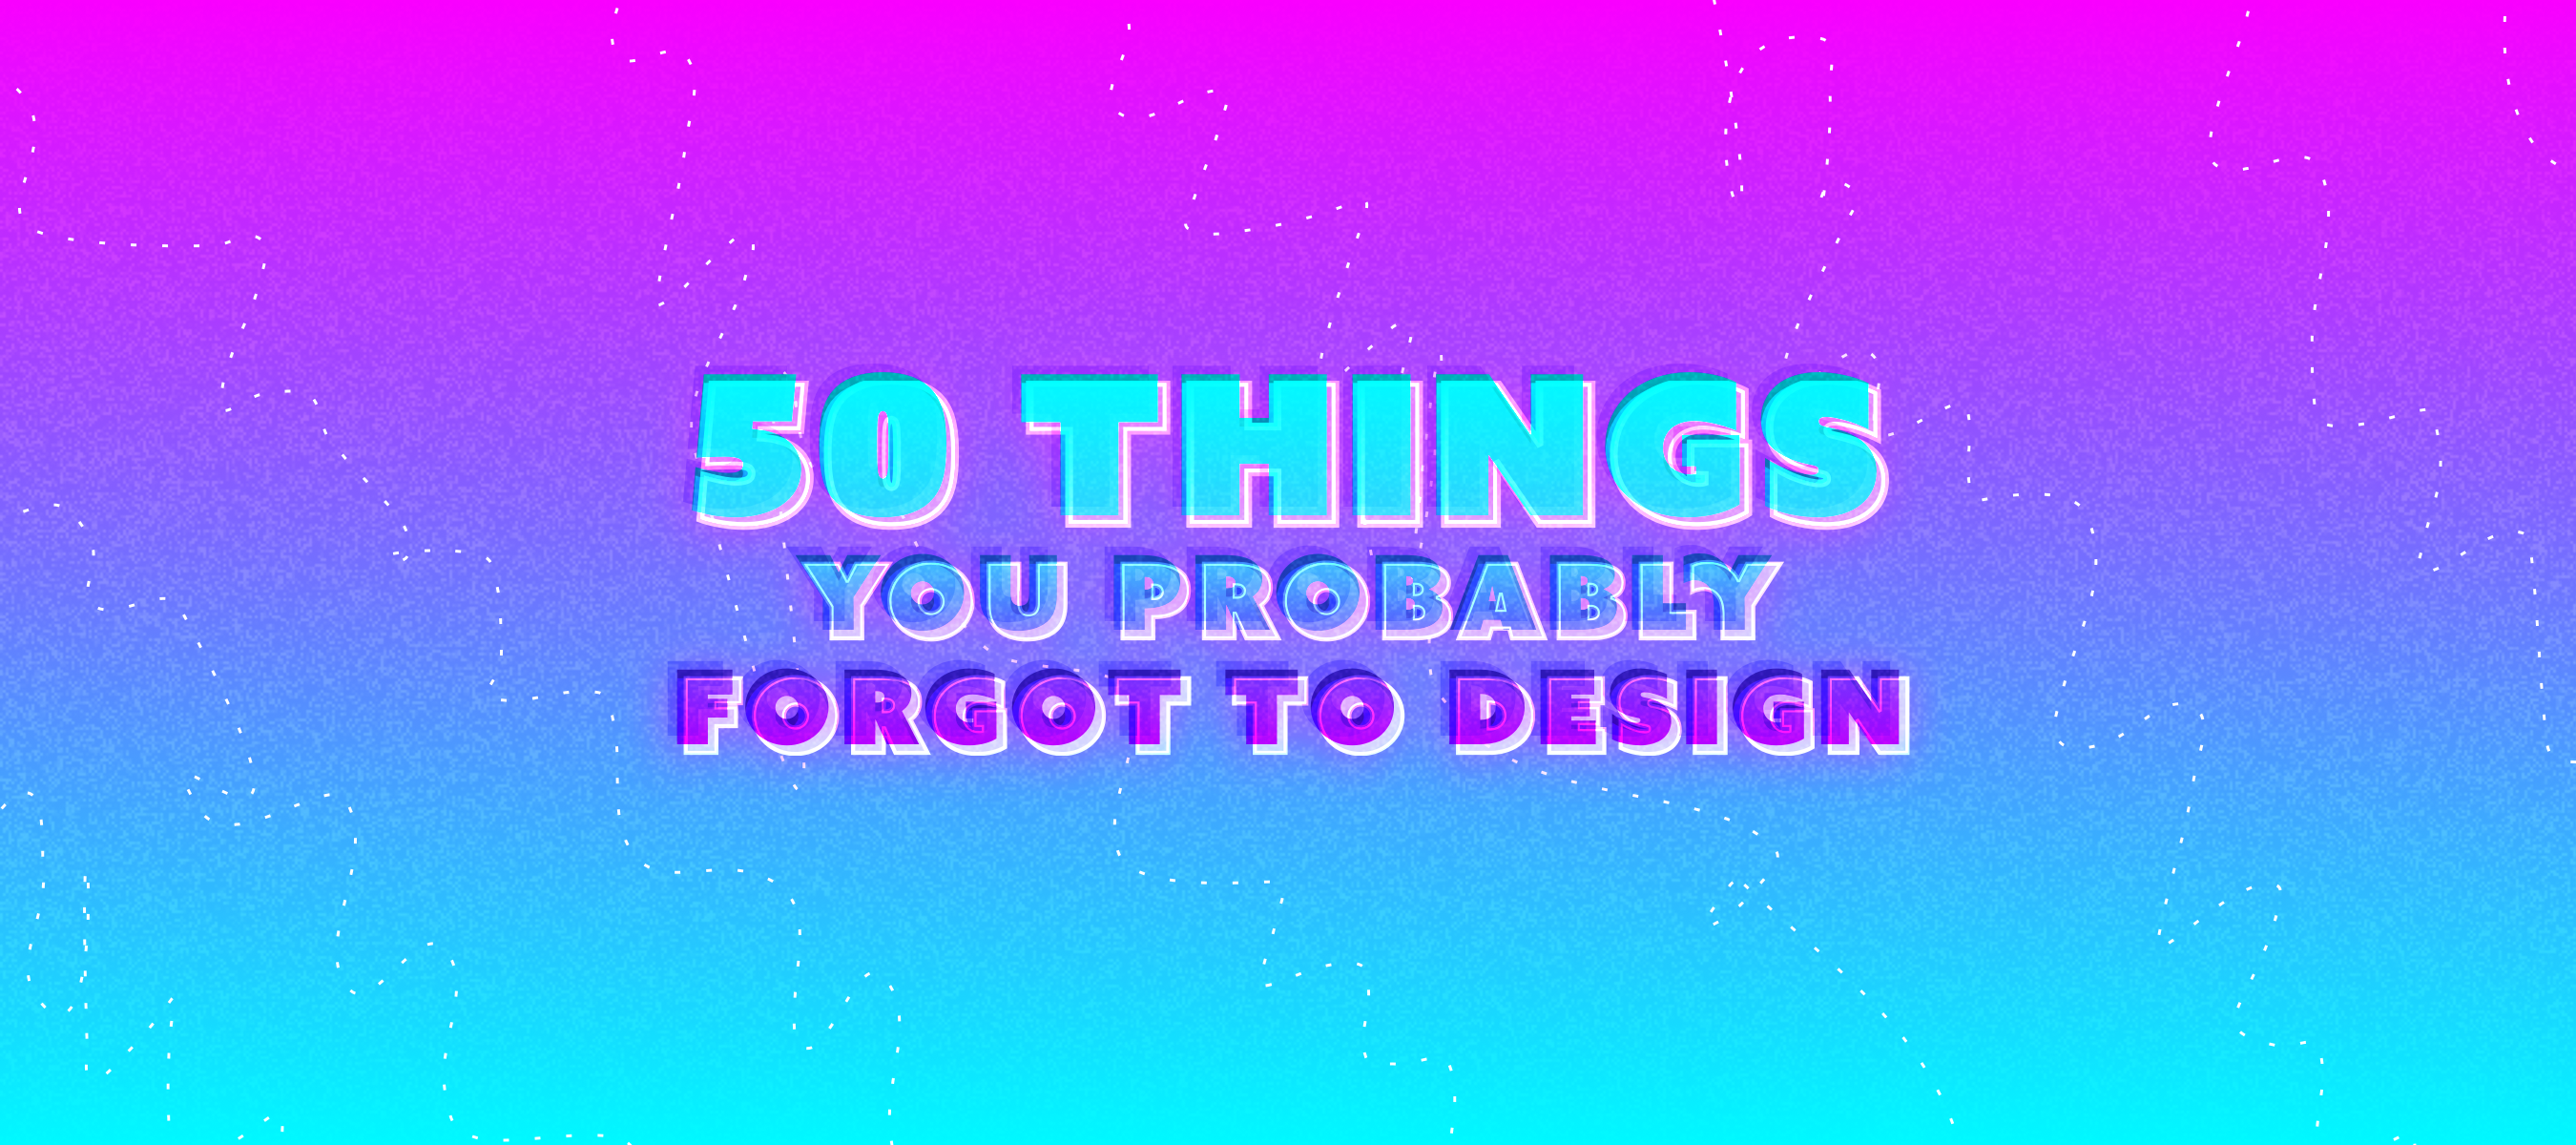 50 things you probably forgot to design